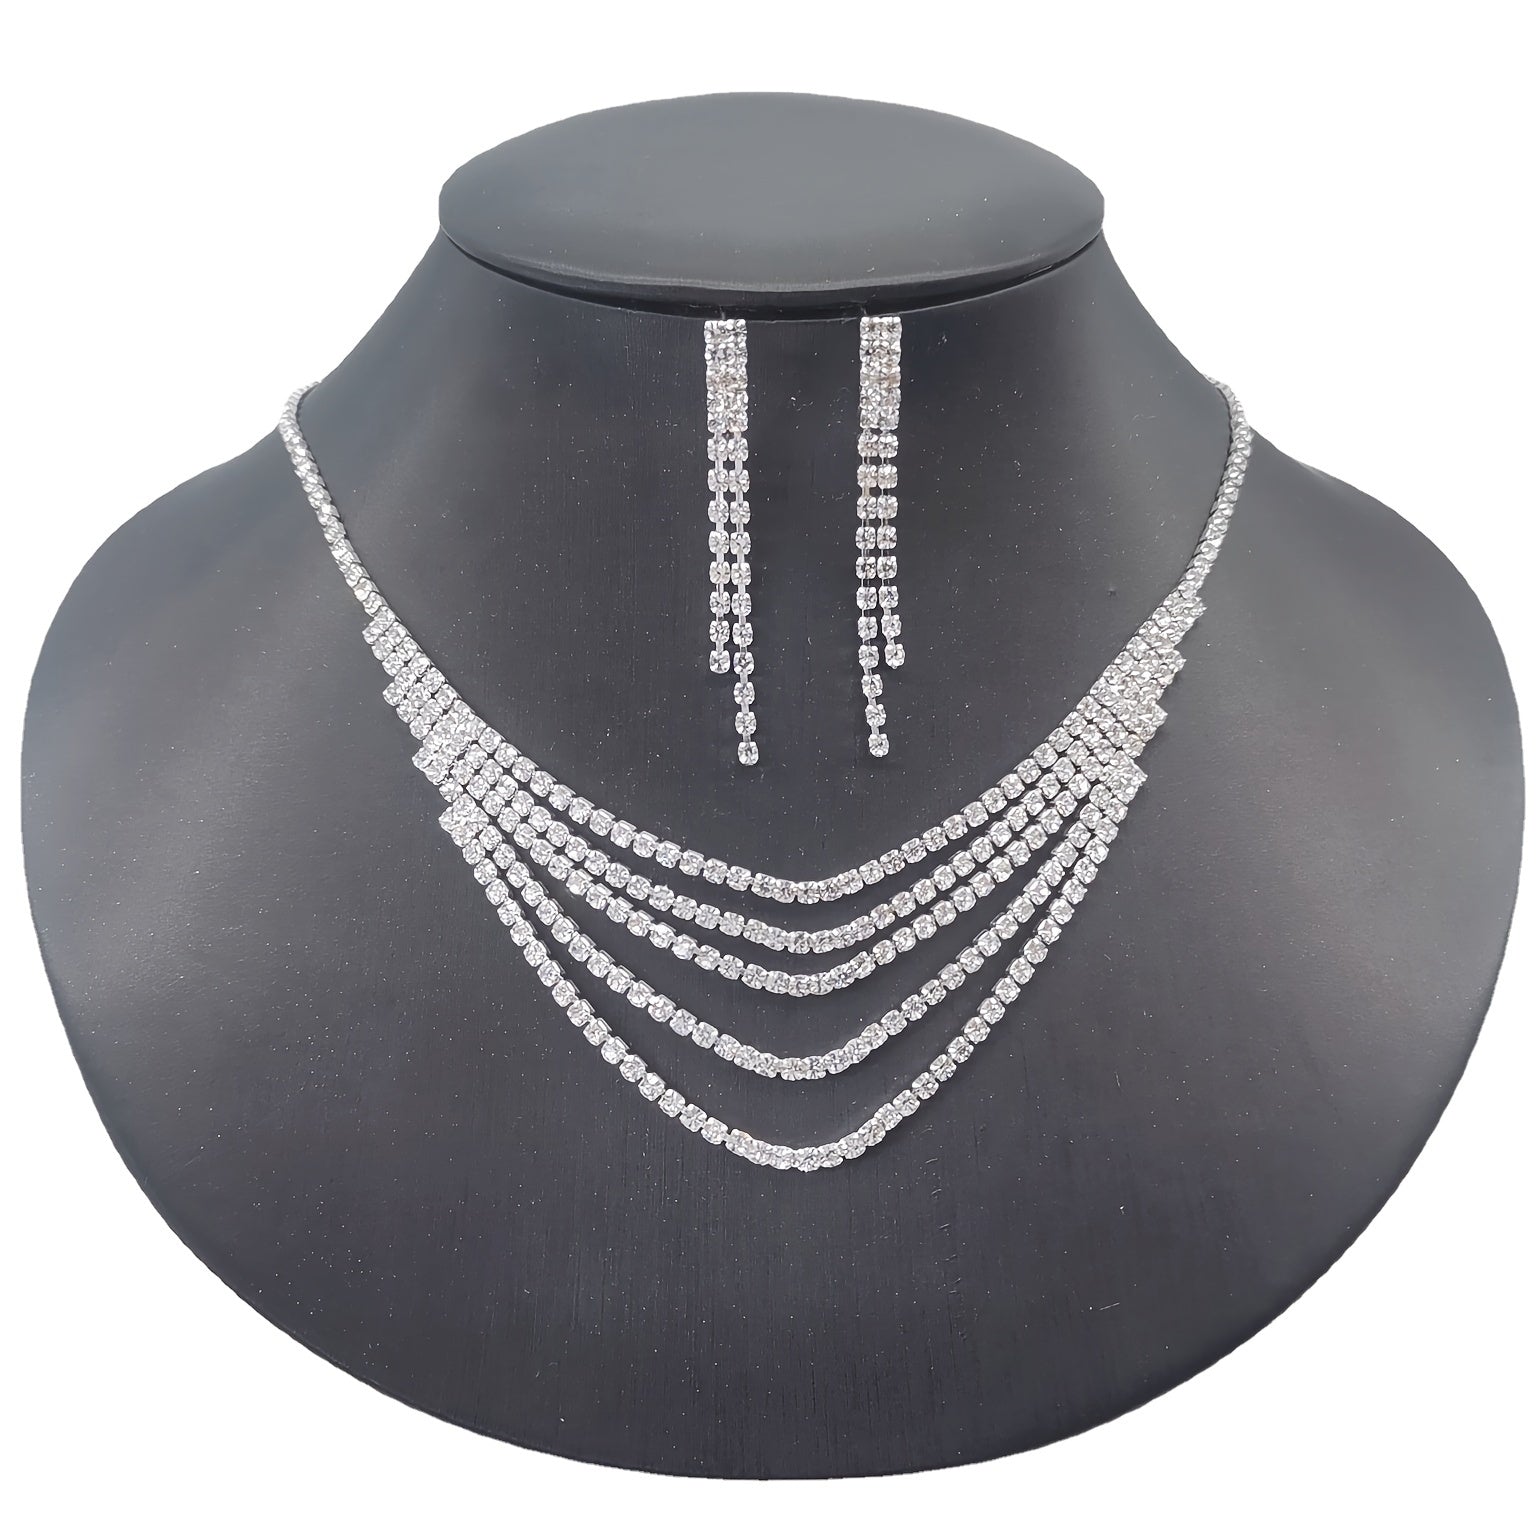 Elegant Rhinestone Bridal Jewelry Set - Perfect for Weddings, Proms, and Special Occasions